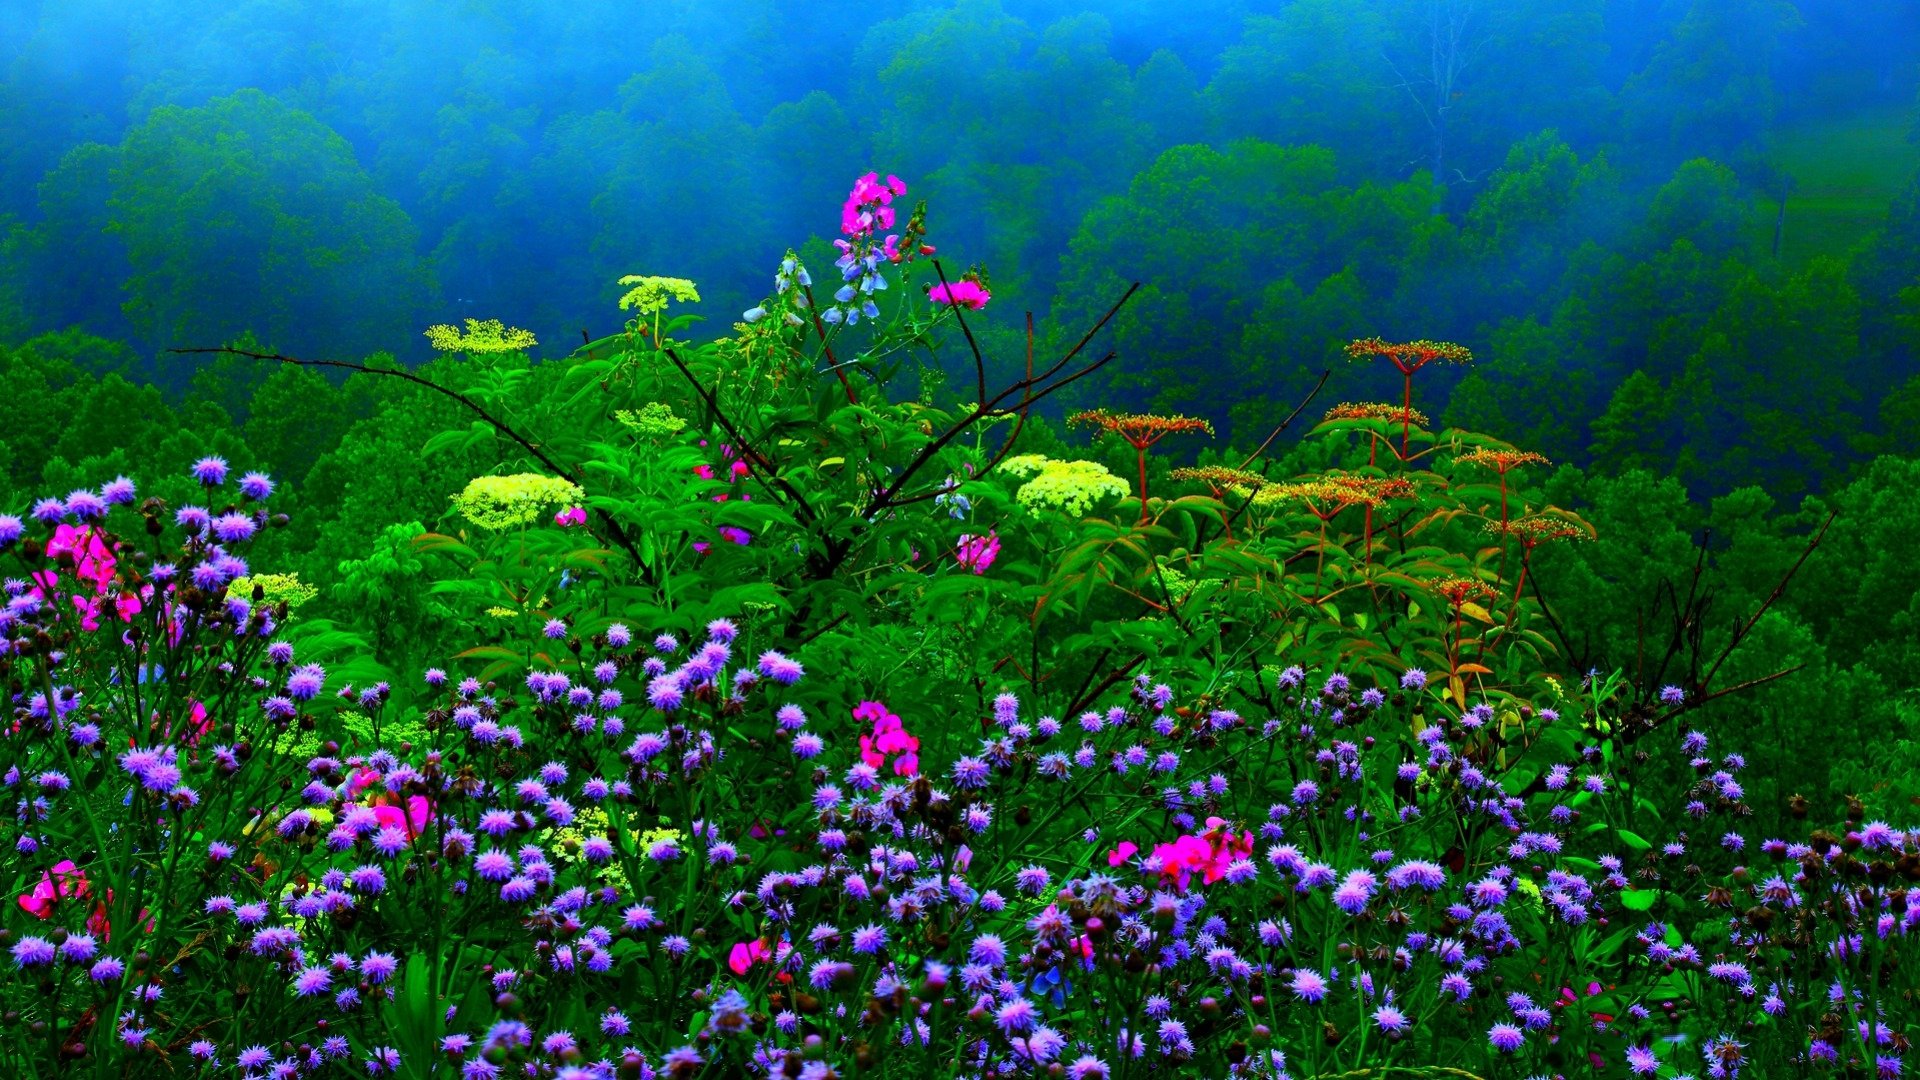 Spring Flowers in Misty Forest